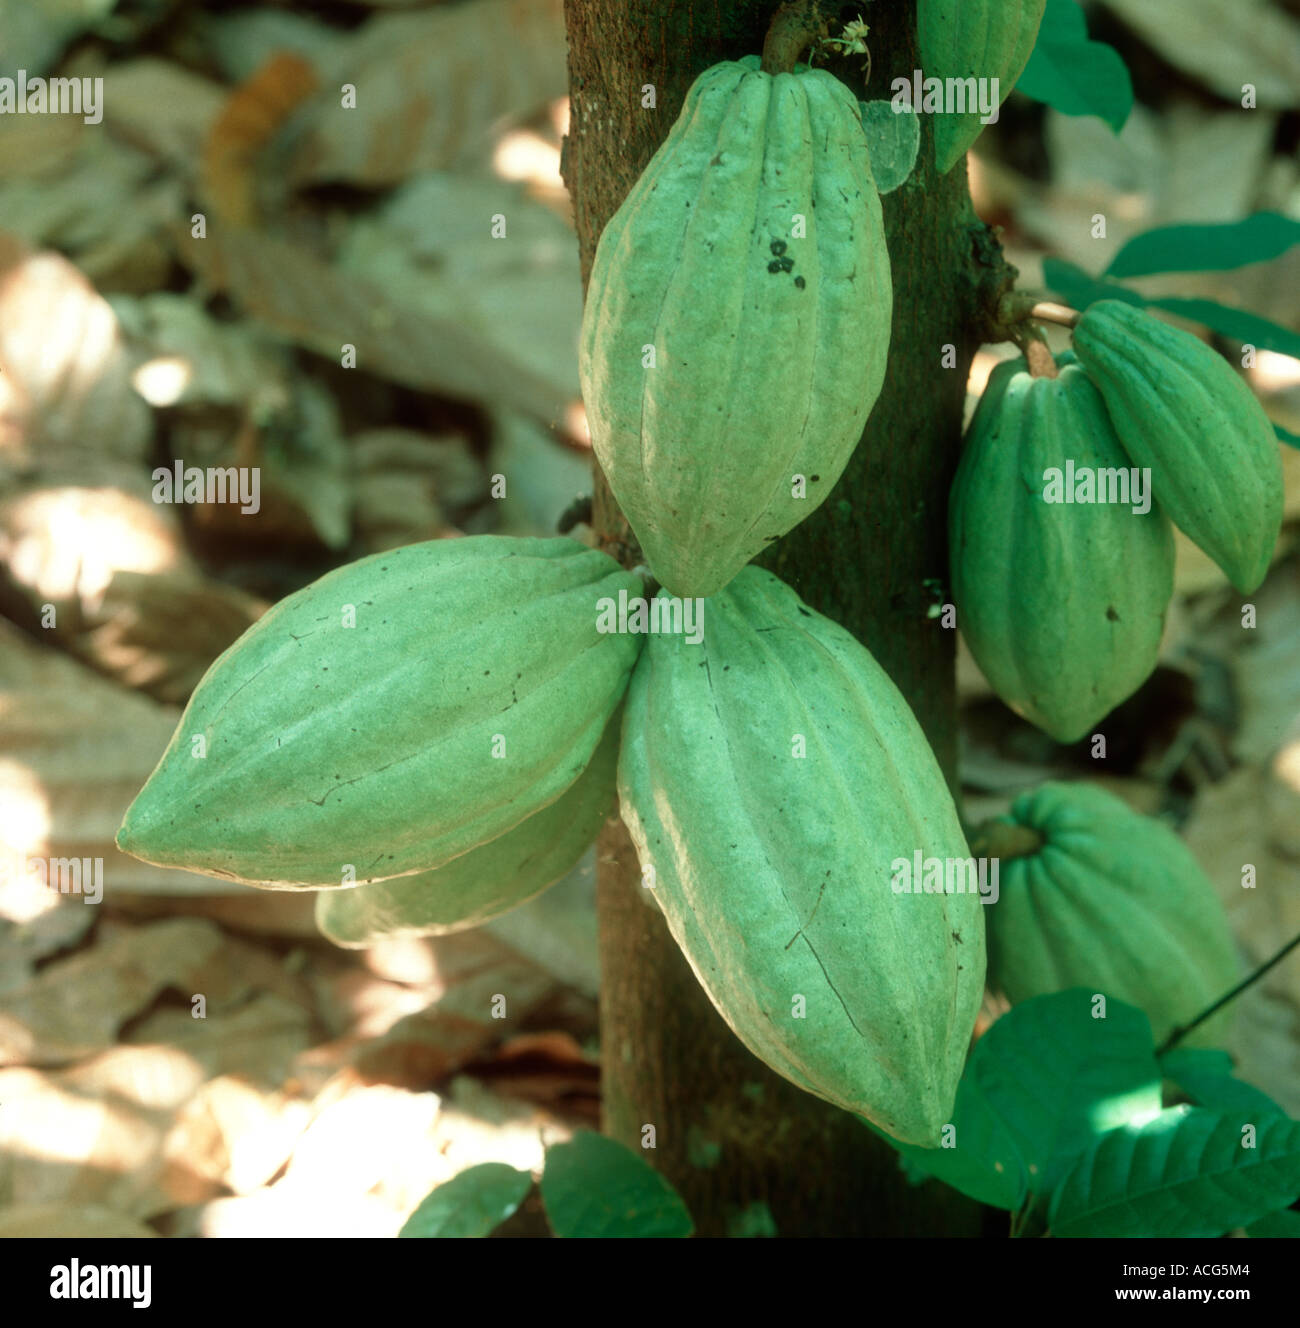 Mature cocoa pods on the tree trunk in the plantion Malaysia Stock Photo